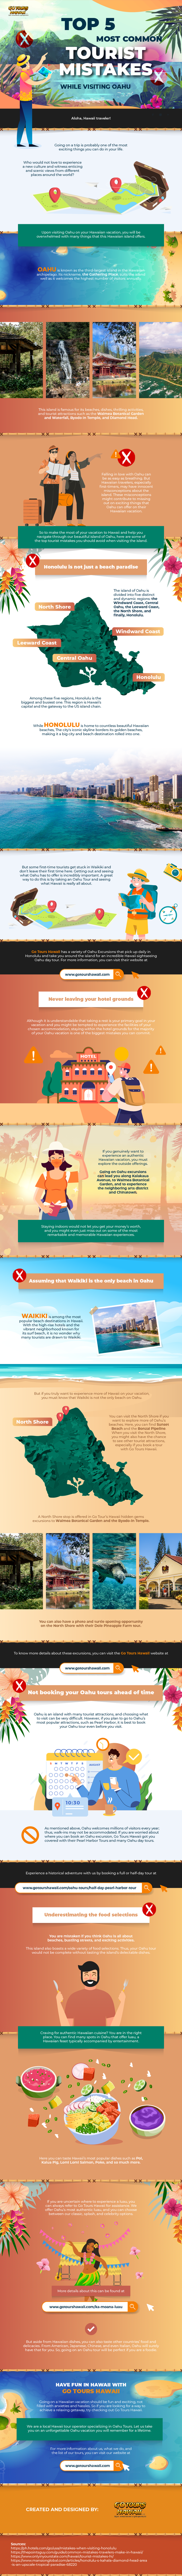 Top_5_Tourist_Mistakes_You_Should_Avoid_When_Visiting_Oahu_infographic_image
